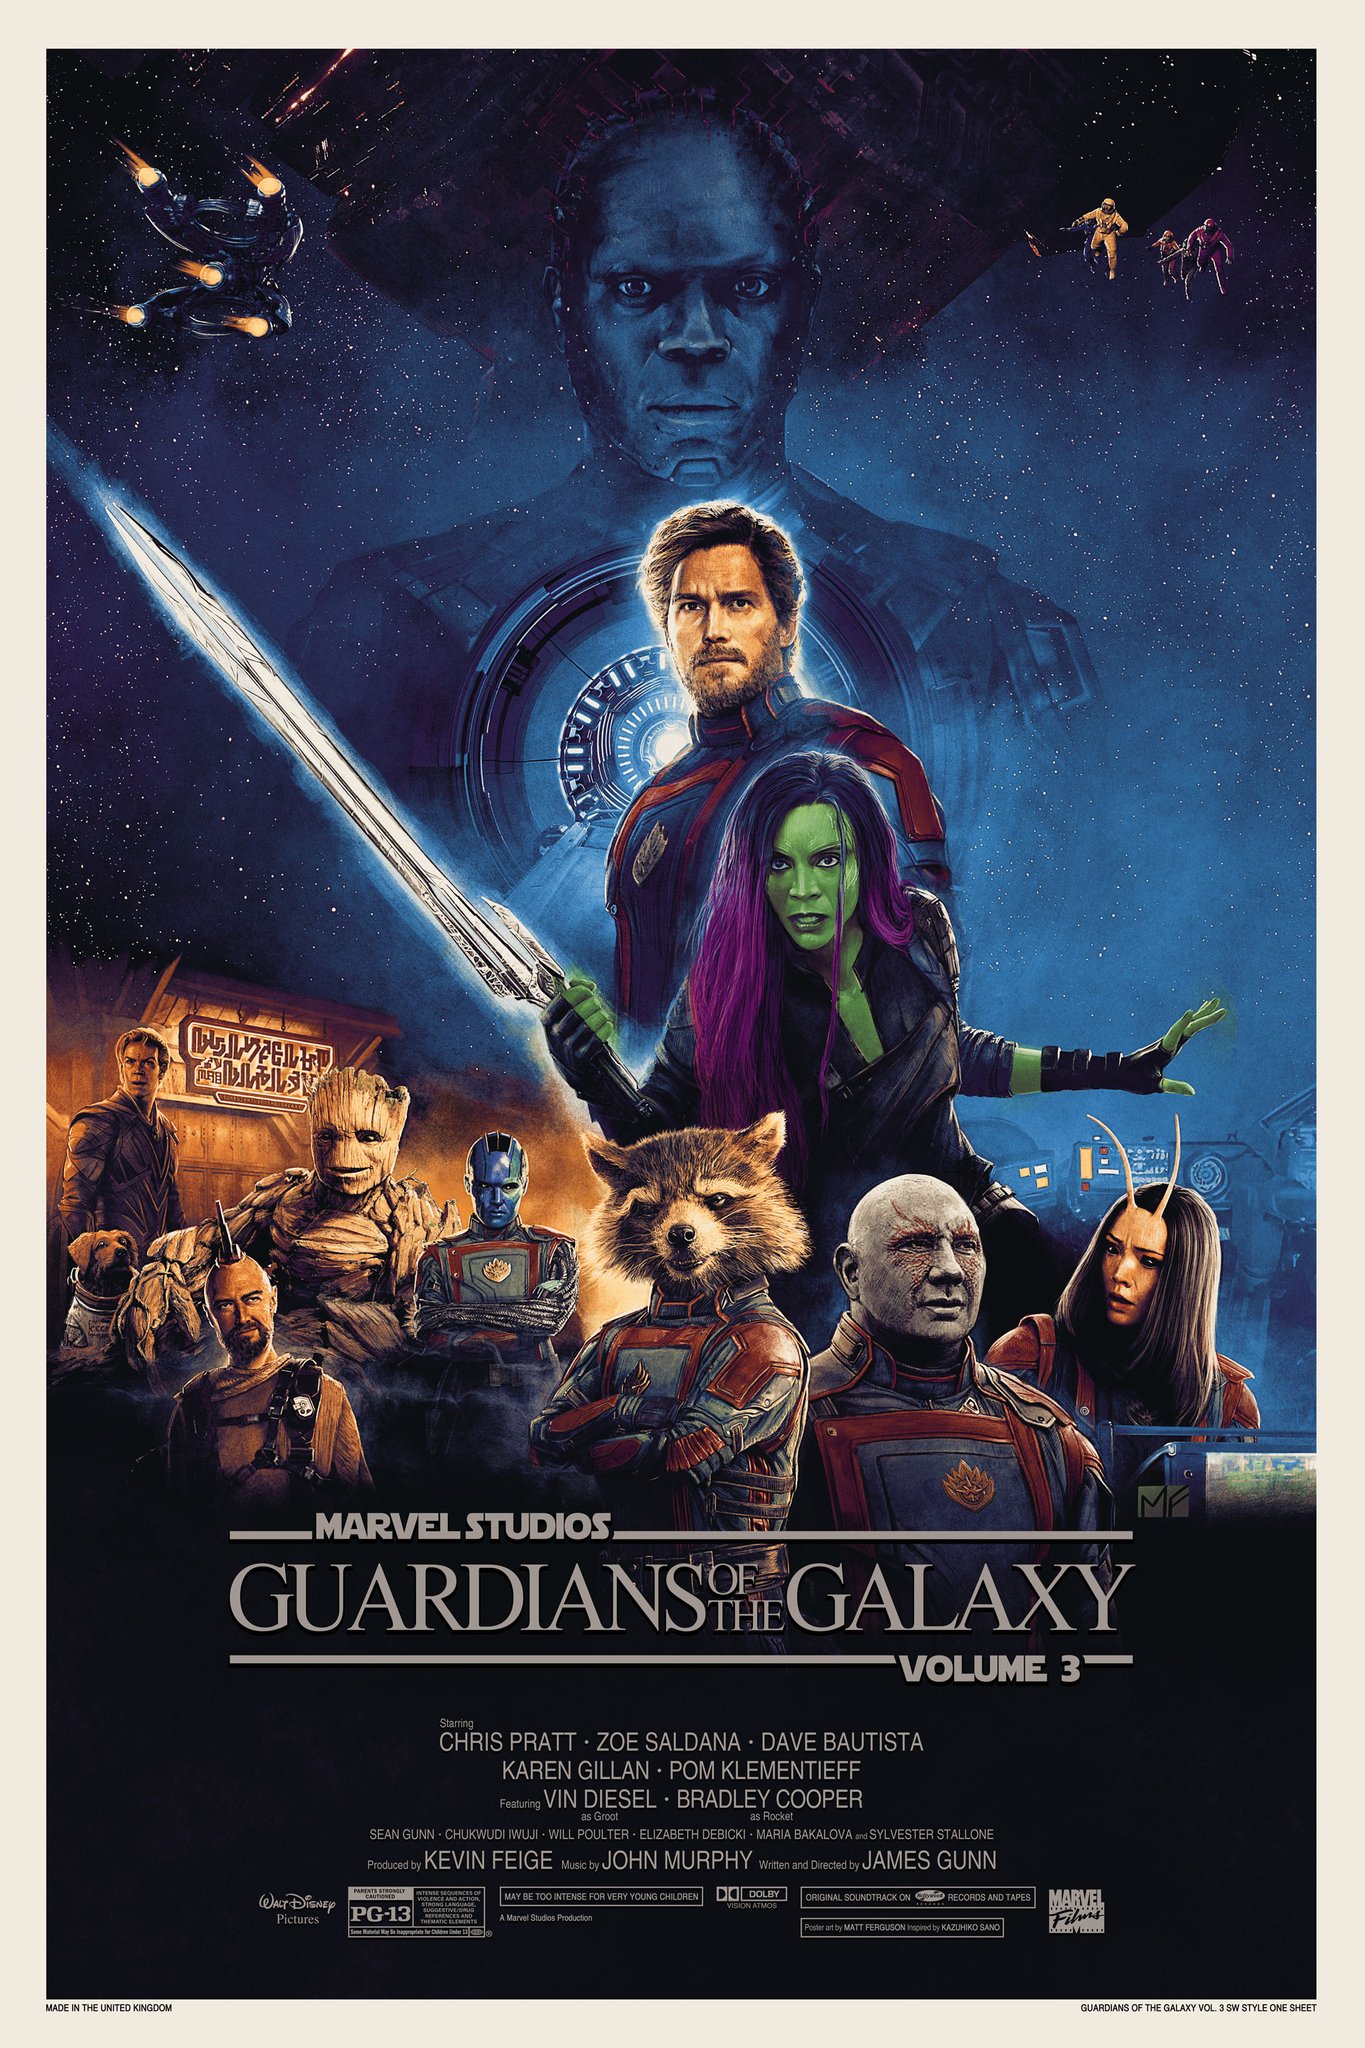 GUARDIANS OF THE GALAXY VOL 3 